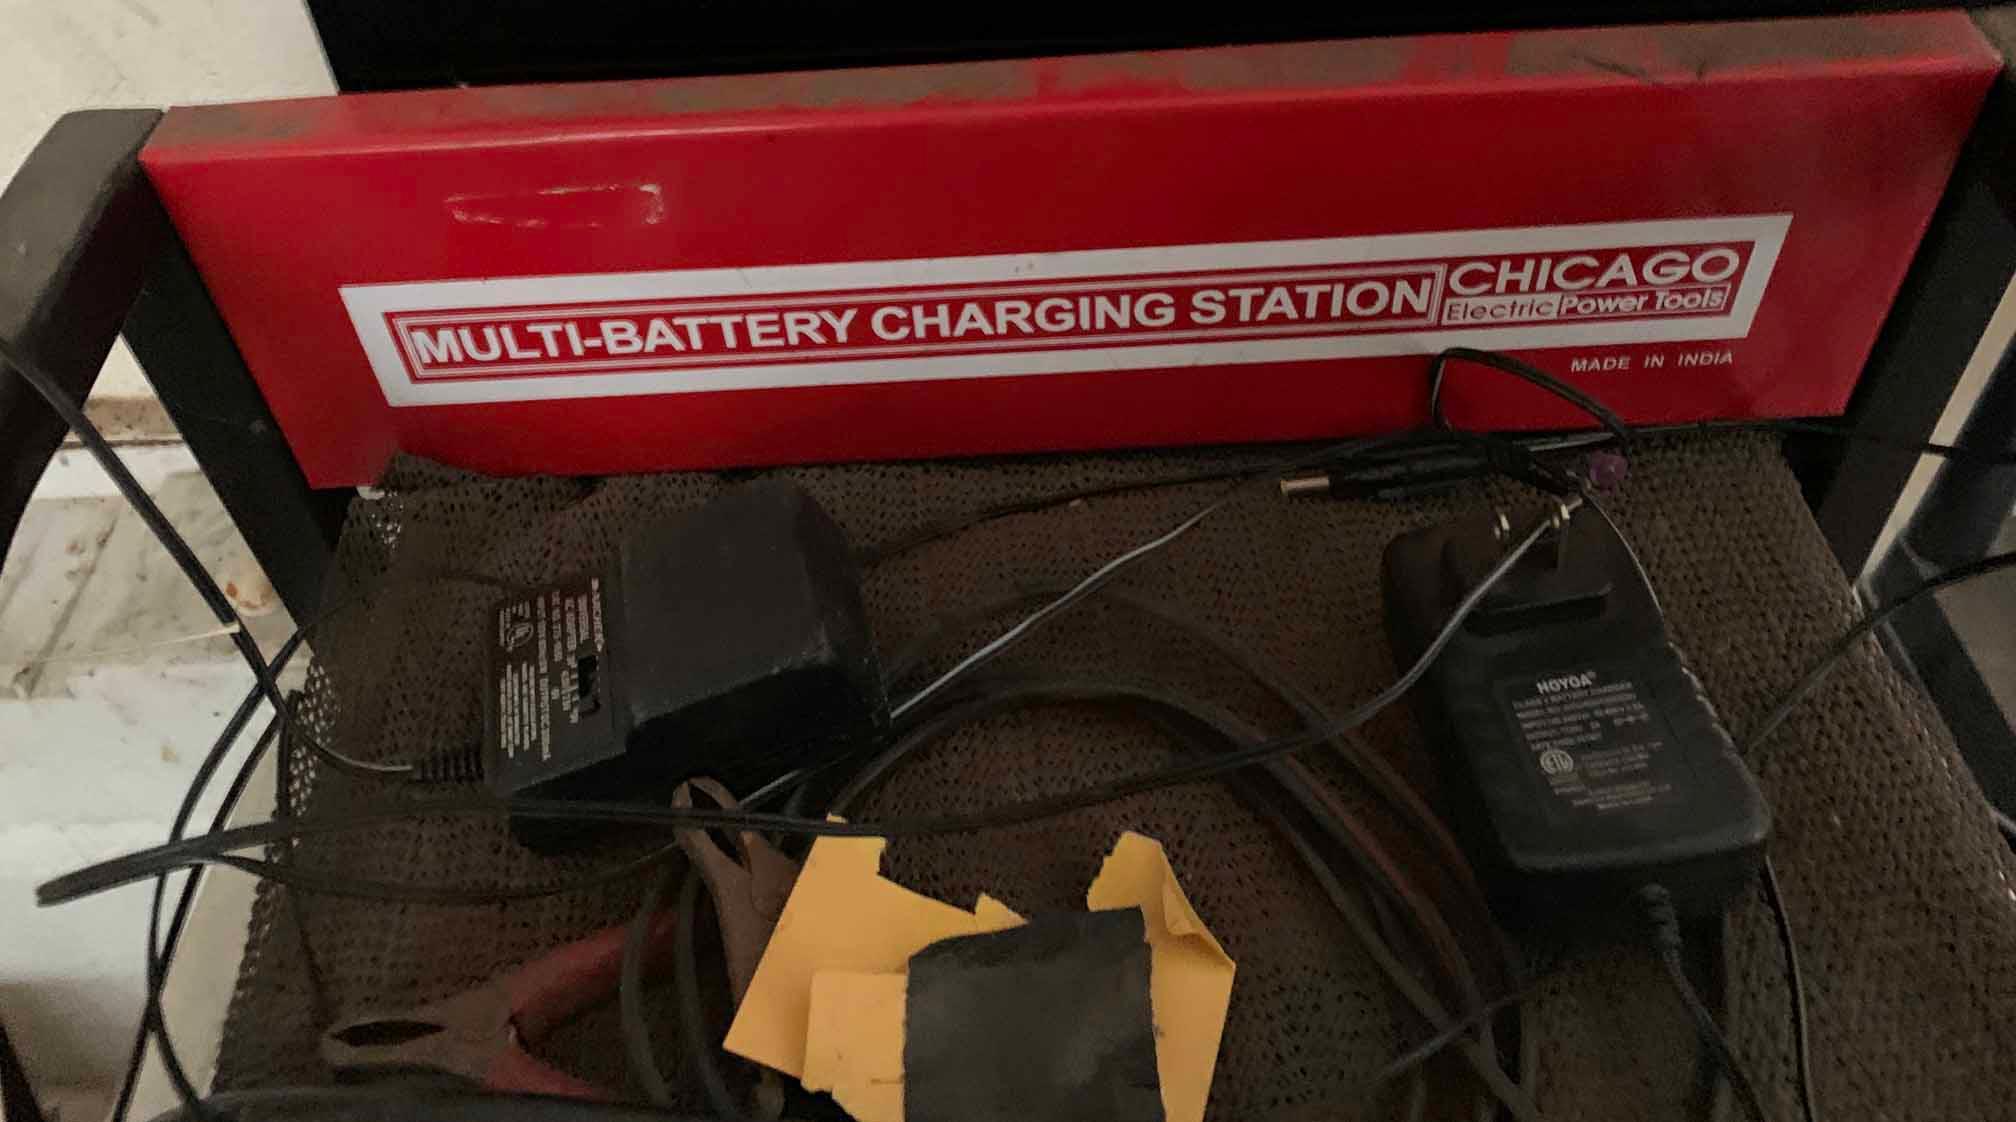 Chicago Multi-Battery Charging Station